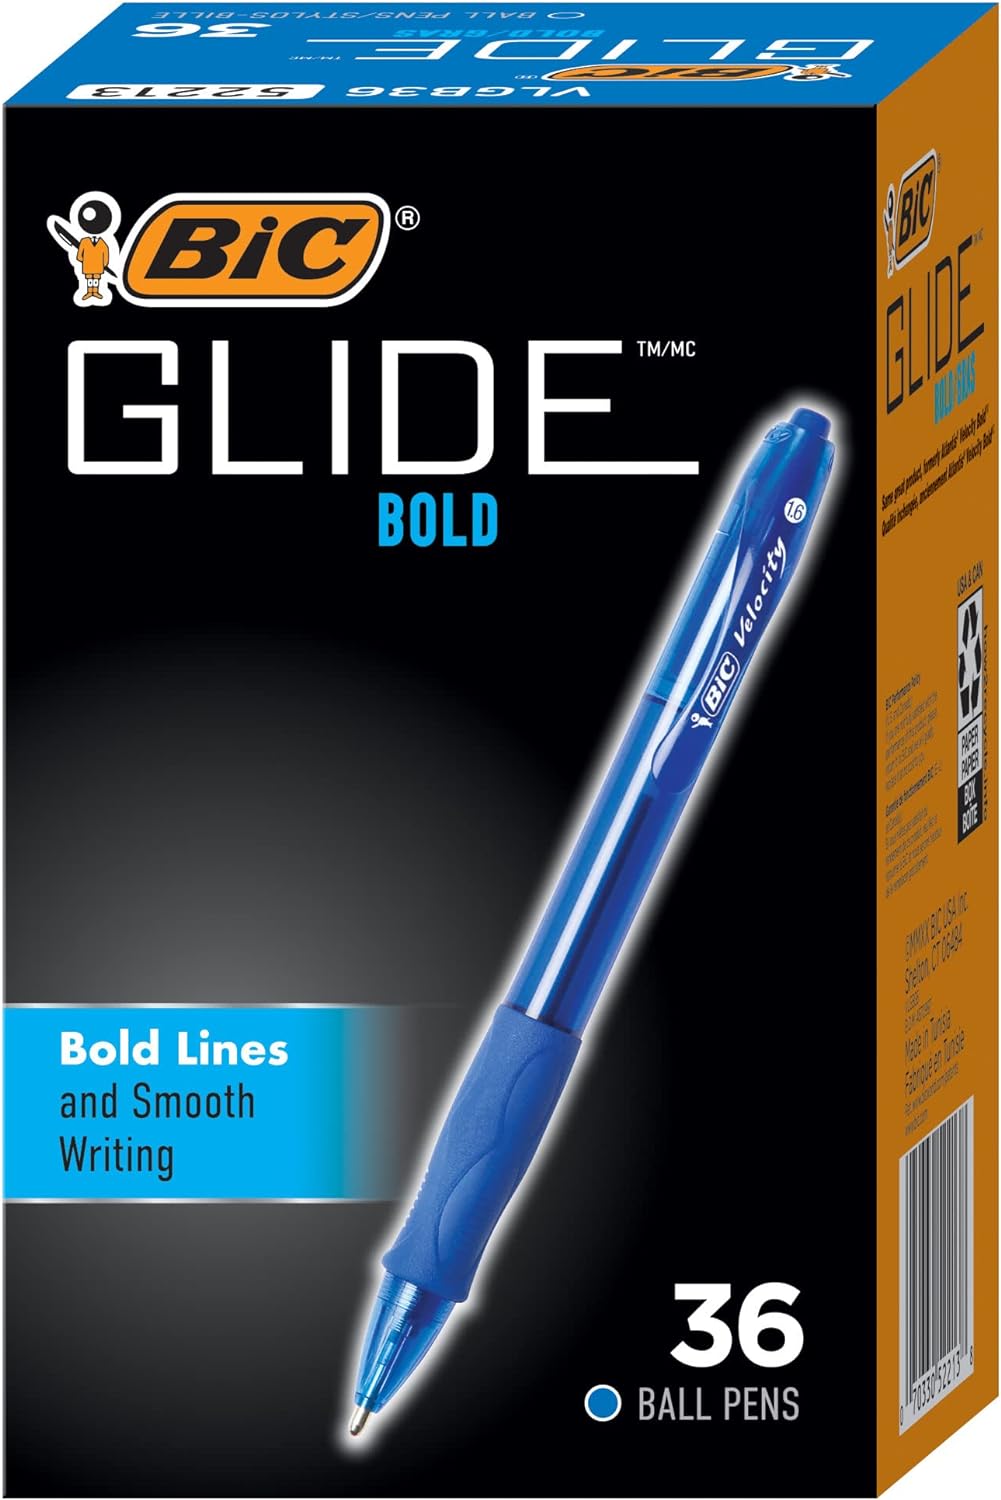 These are the best pens Ive found in the past decade. I am extremely picky because Im a lefty and a contractor that uses writing utensils on job sites from plans to wood measurements with a subcontractor to even contracts. My biggest problem for over 50 years have always been the thin tips I can break off, not get any ink from to the tip breaking entirely but once my daughter showed me these 1.6mm pens exists I havent been able to use anything else. I love the blue ones because I typically li